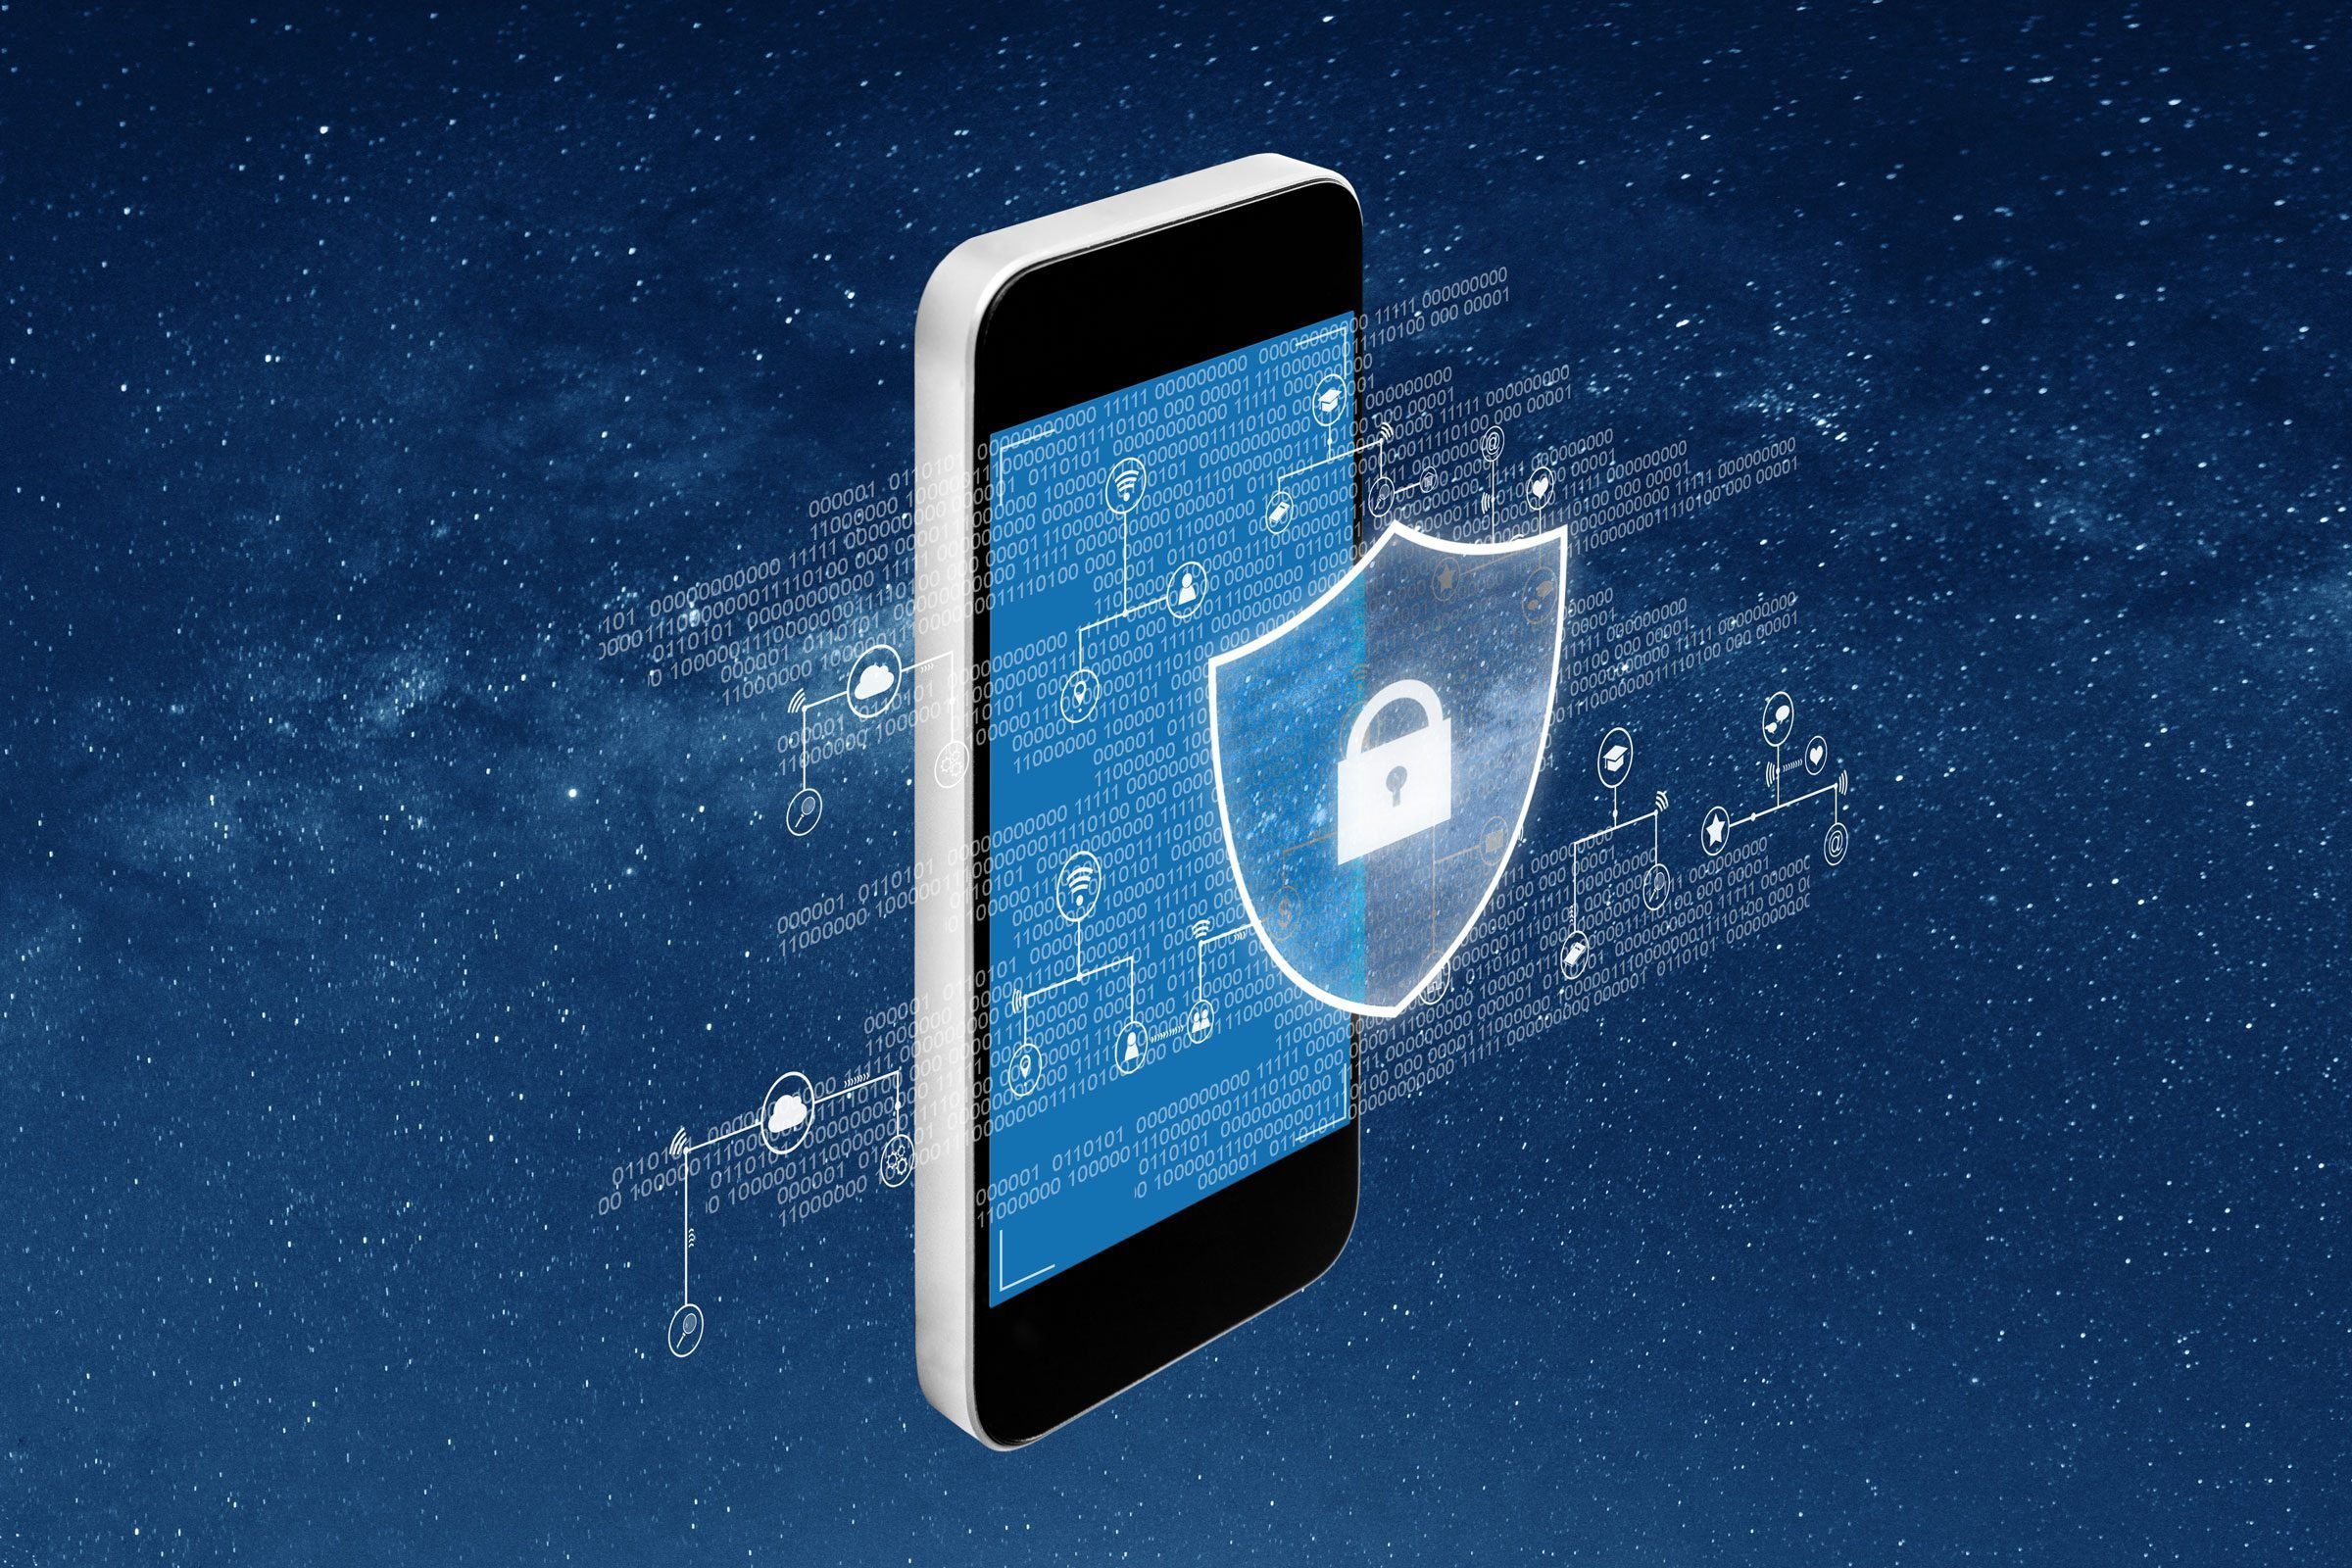 concept illustration of encrypted data across the screen of a smartphone with a shield and lock symbol